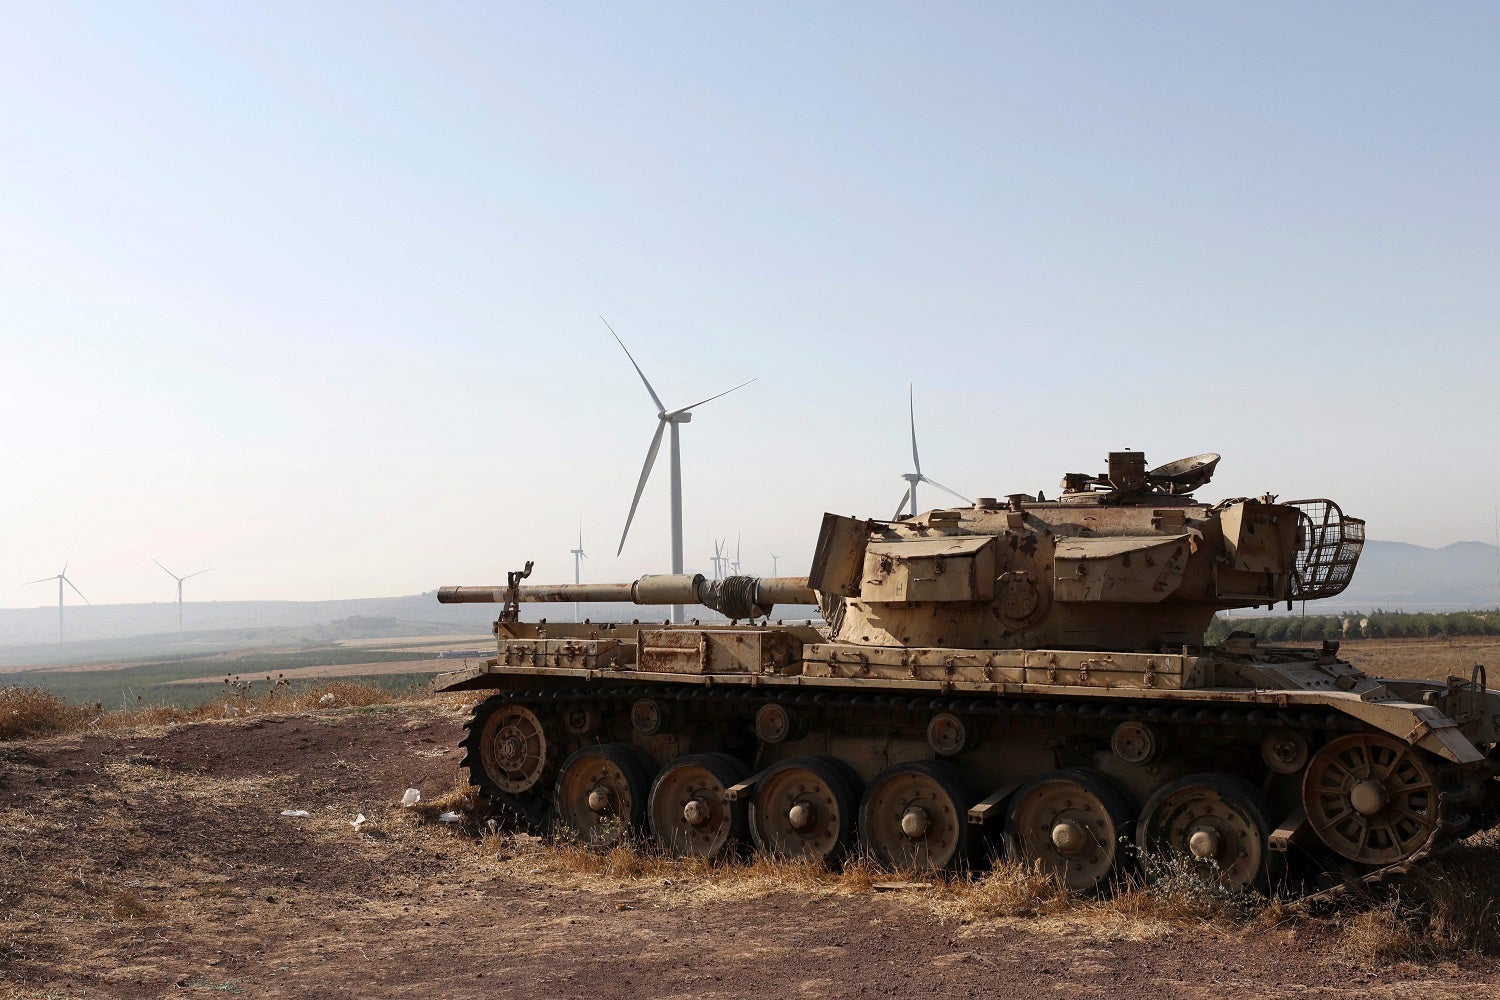 Old Israeli war tank with wind turbines in the background